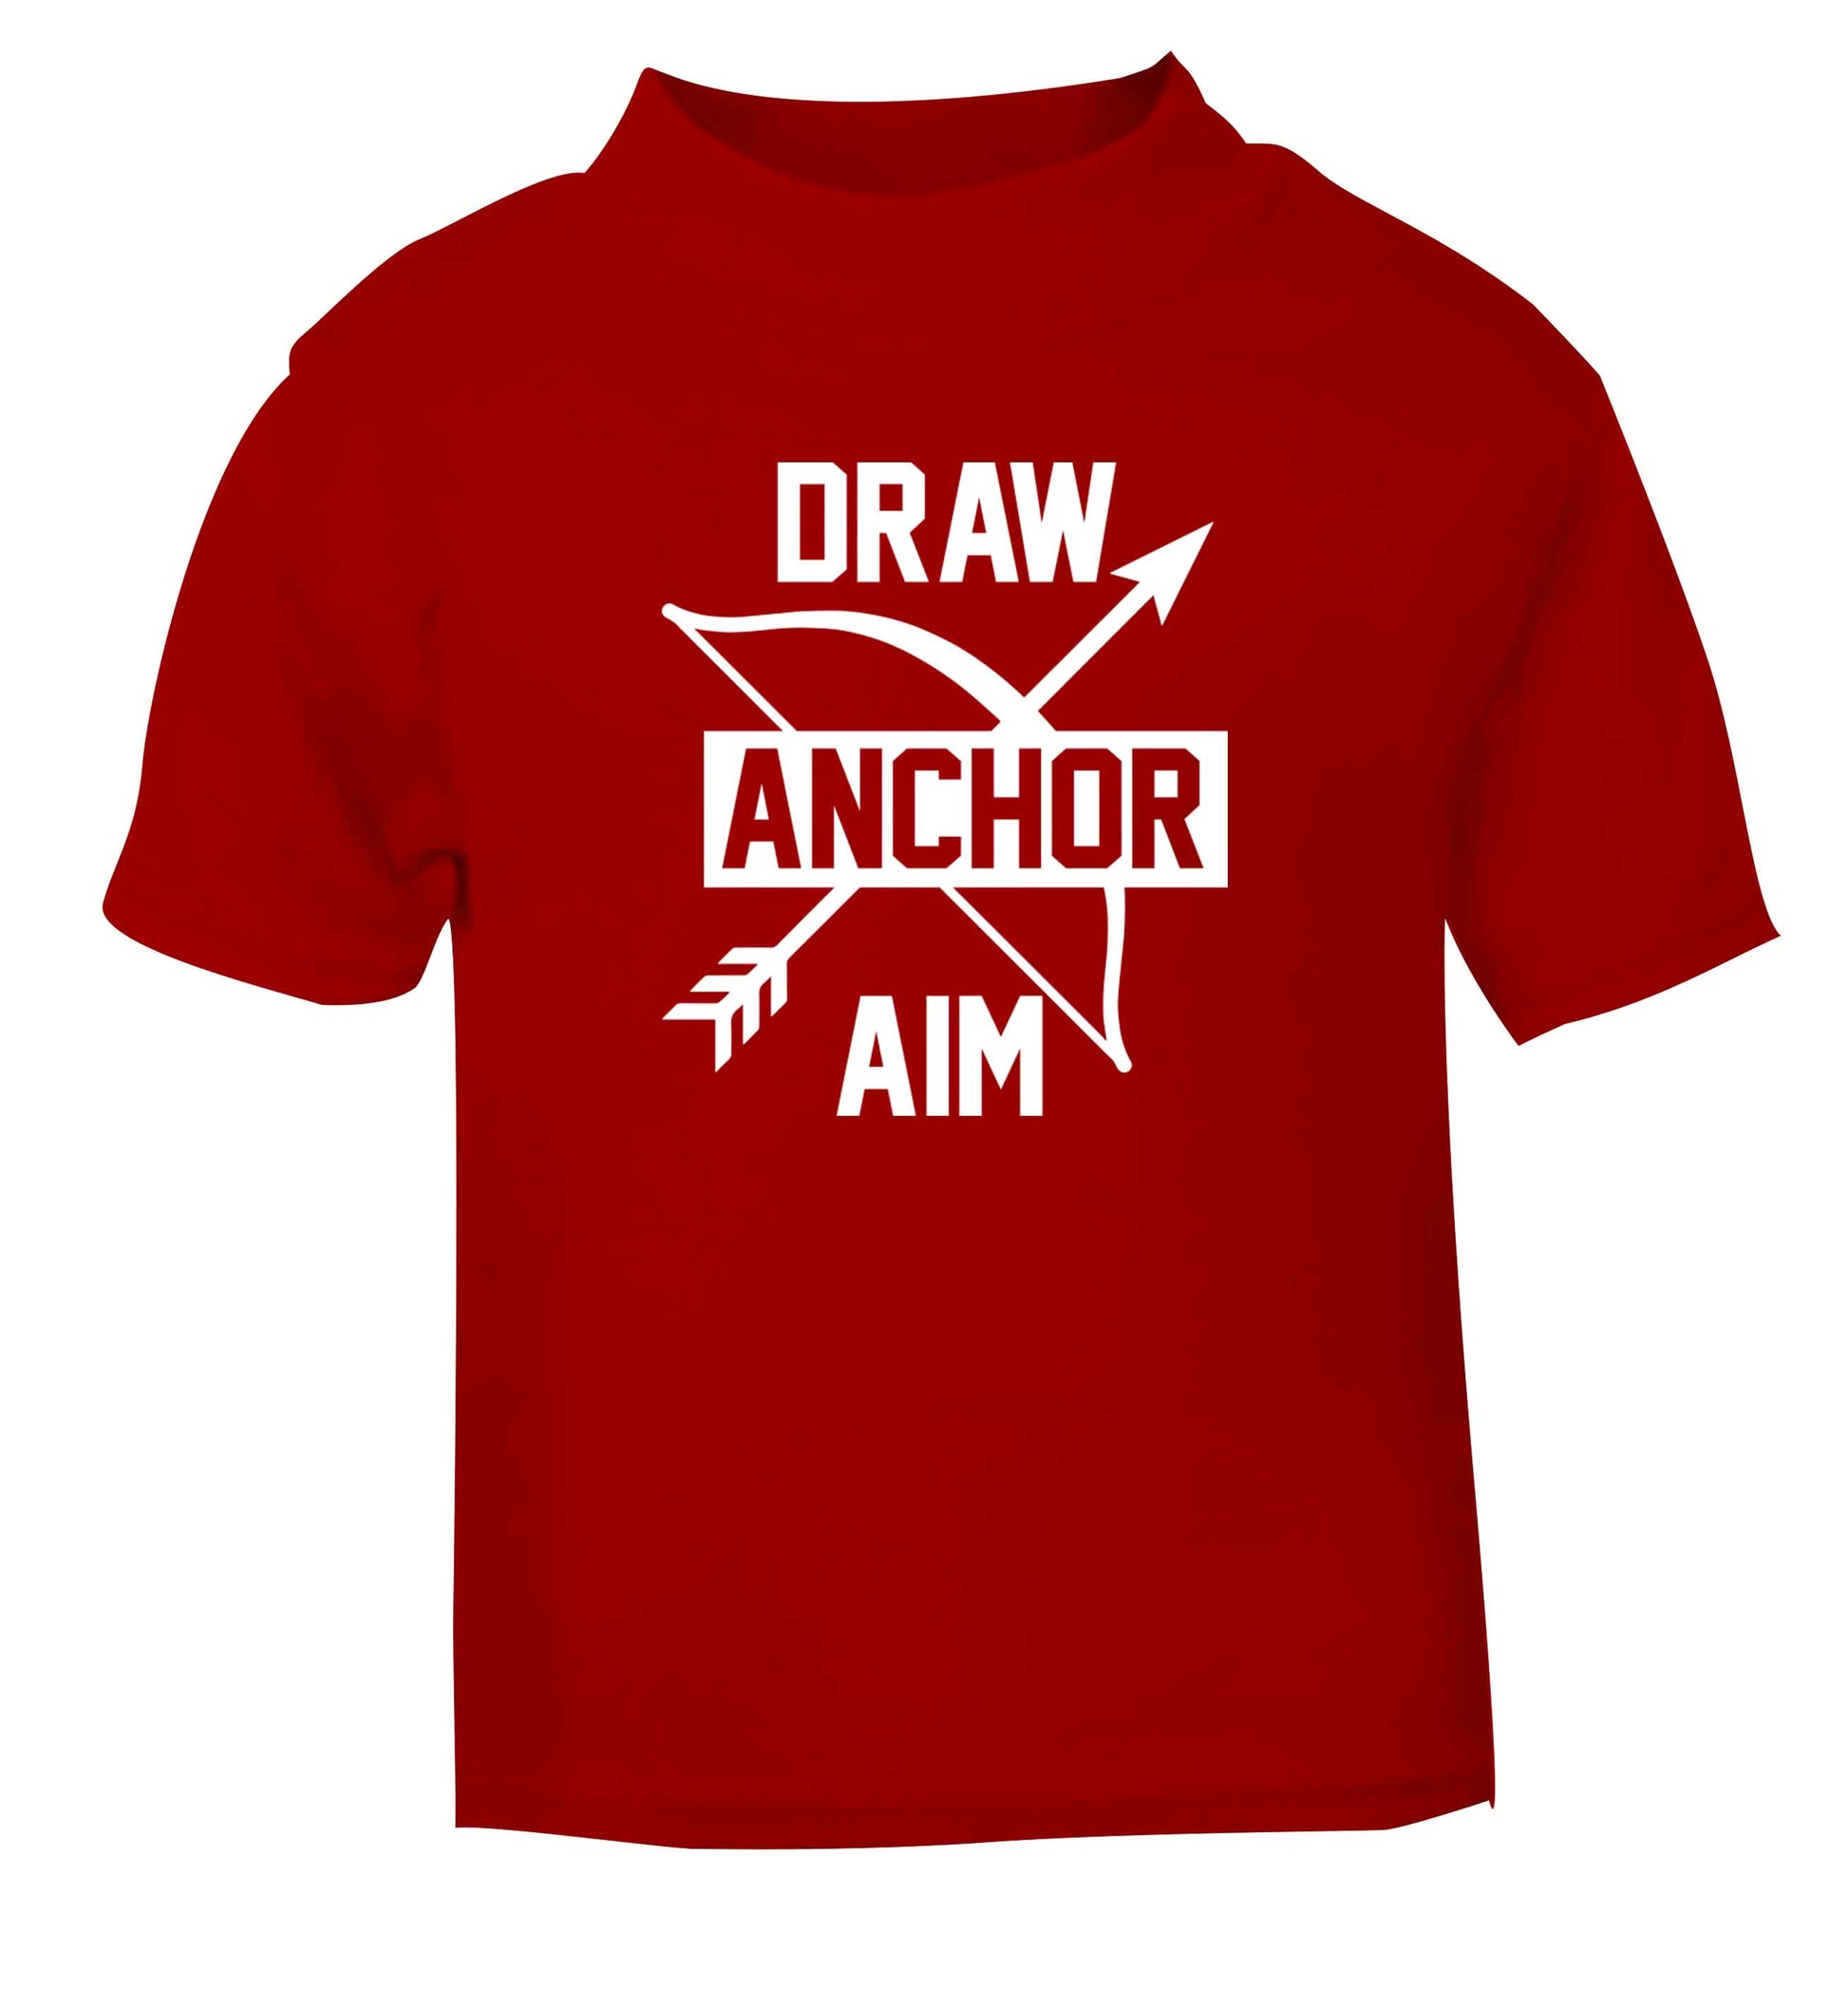 Draw anchor aim red Baby Toddler Tshirt 2 Years